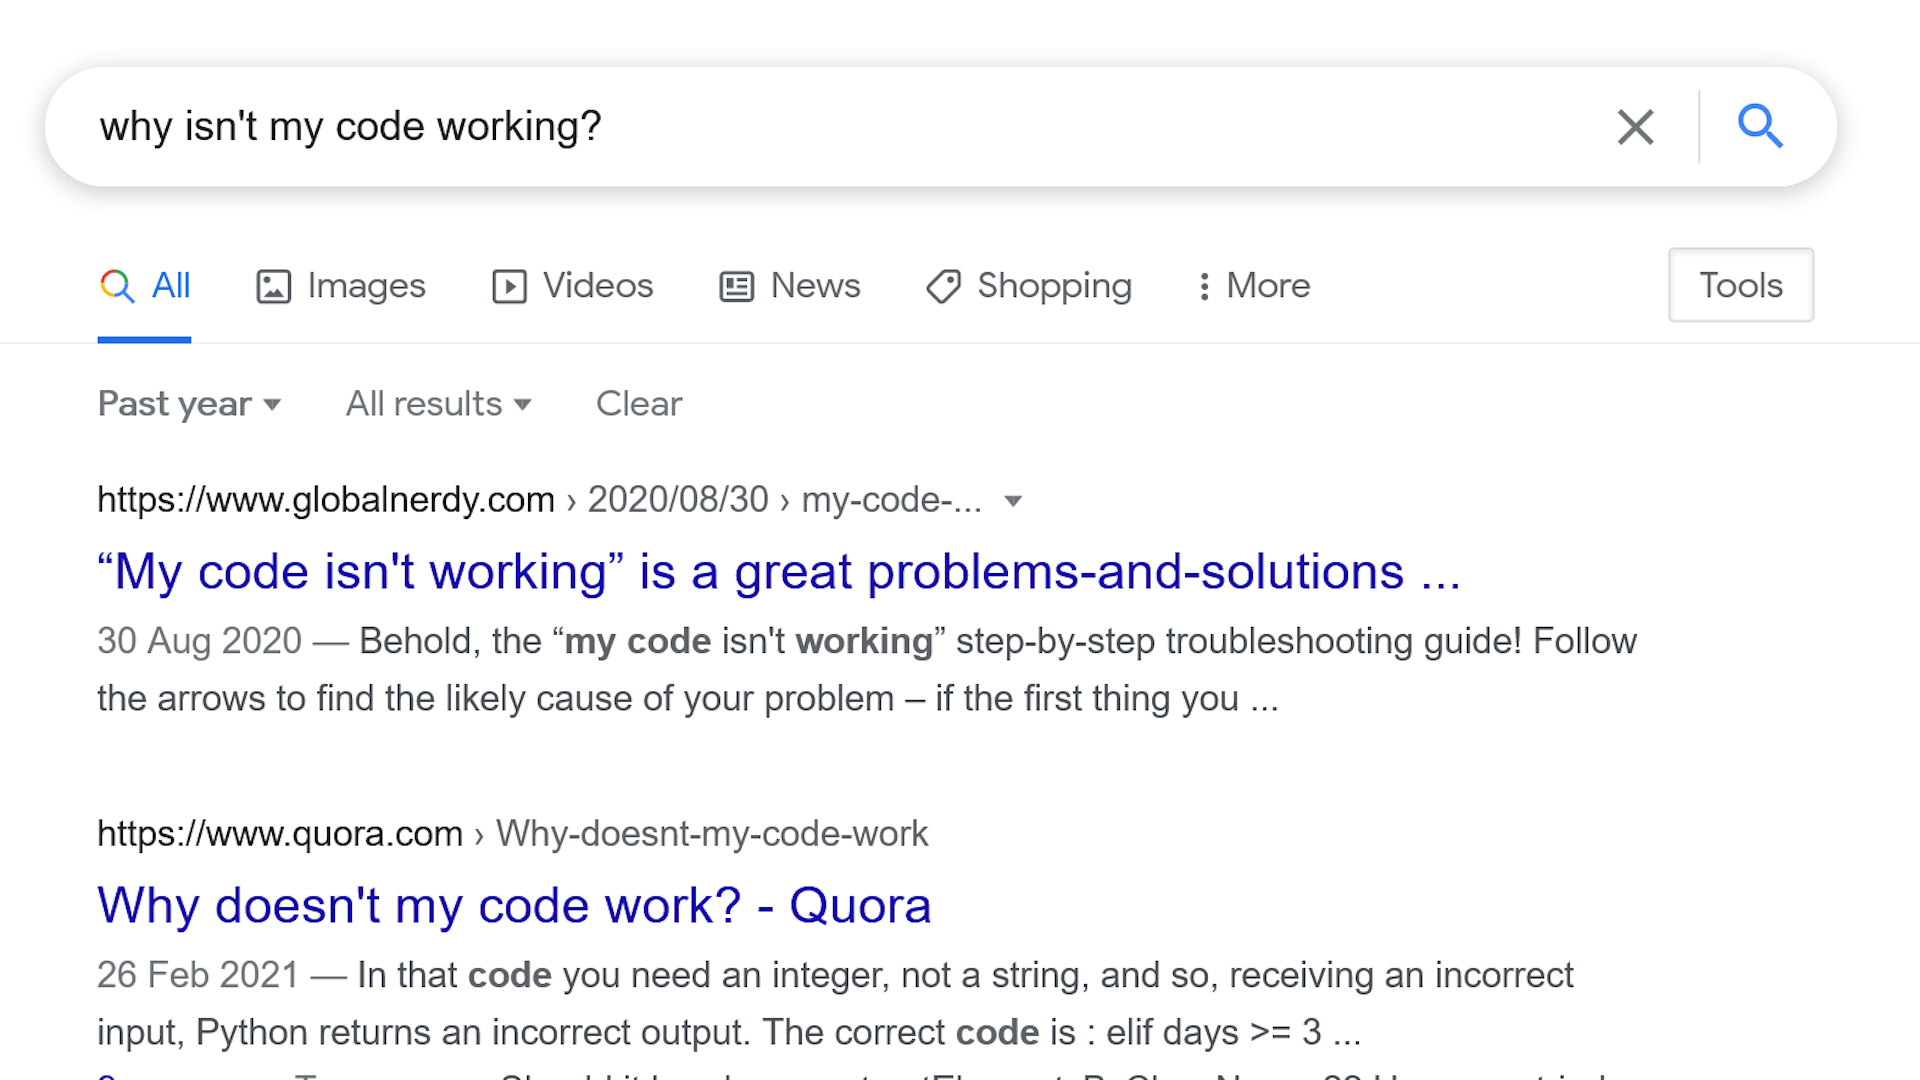 Google search for "Why isn't my code working?"